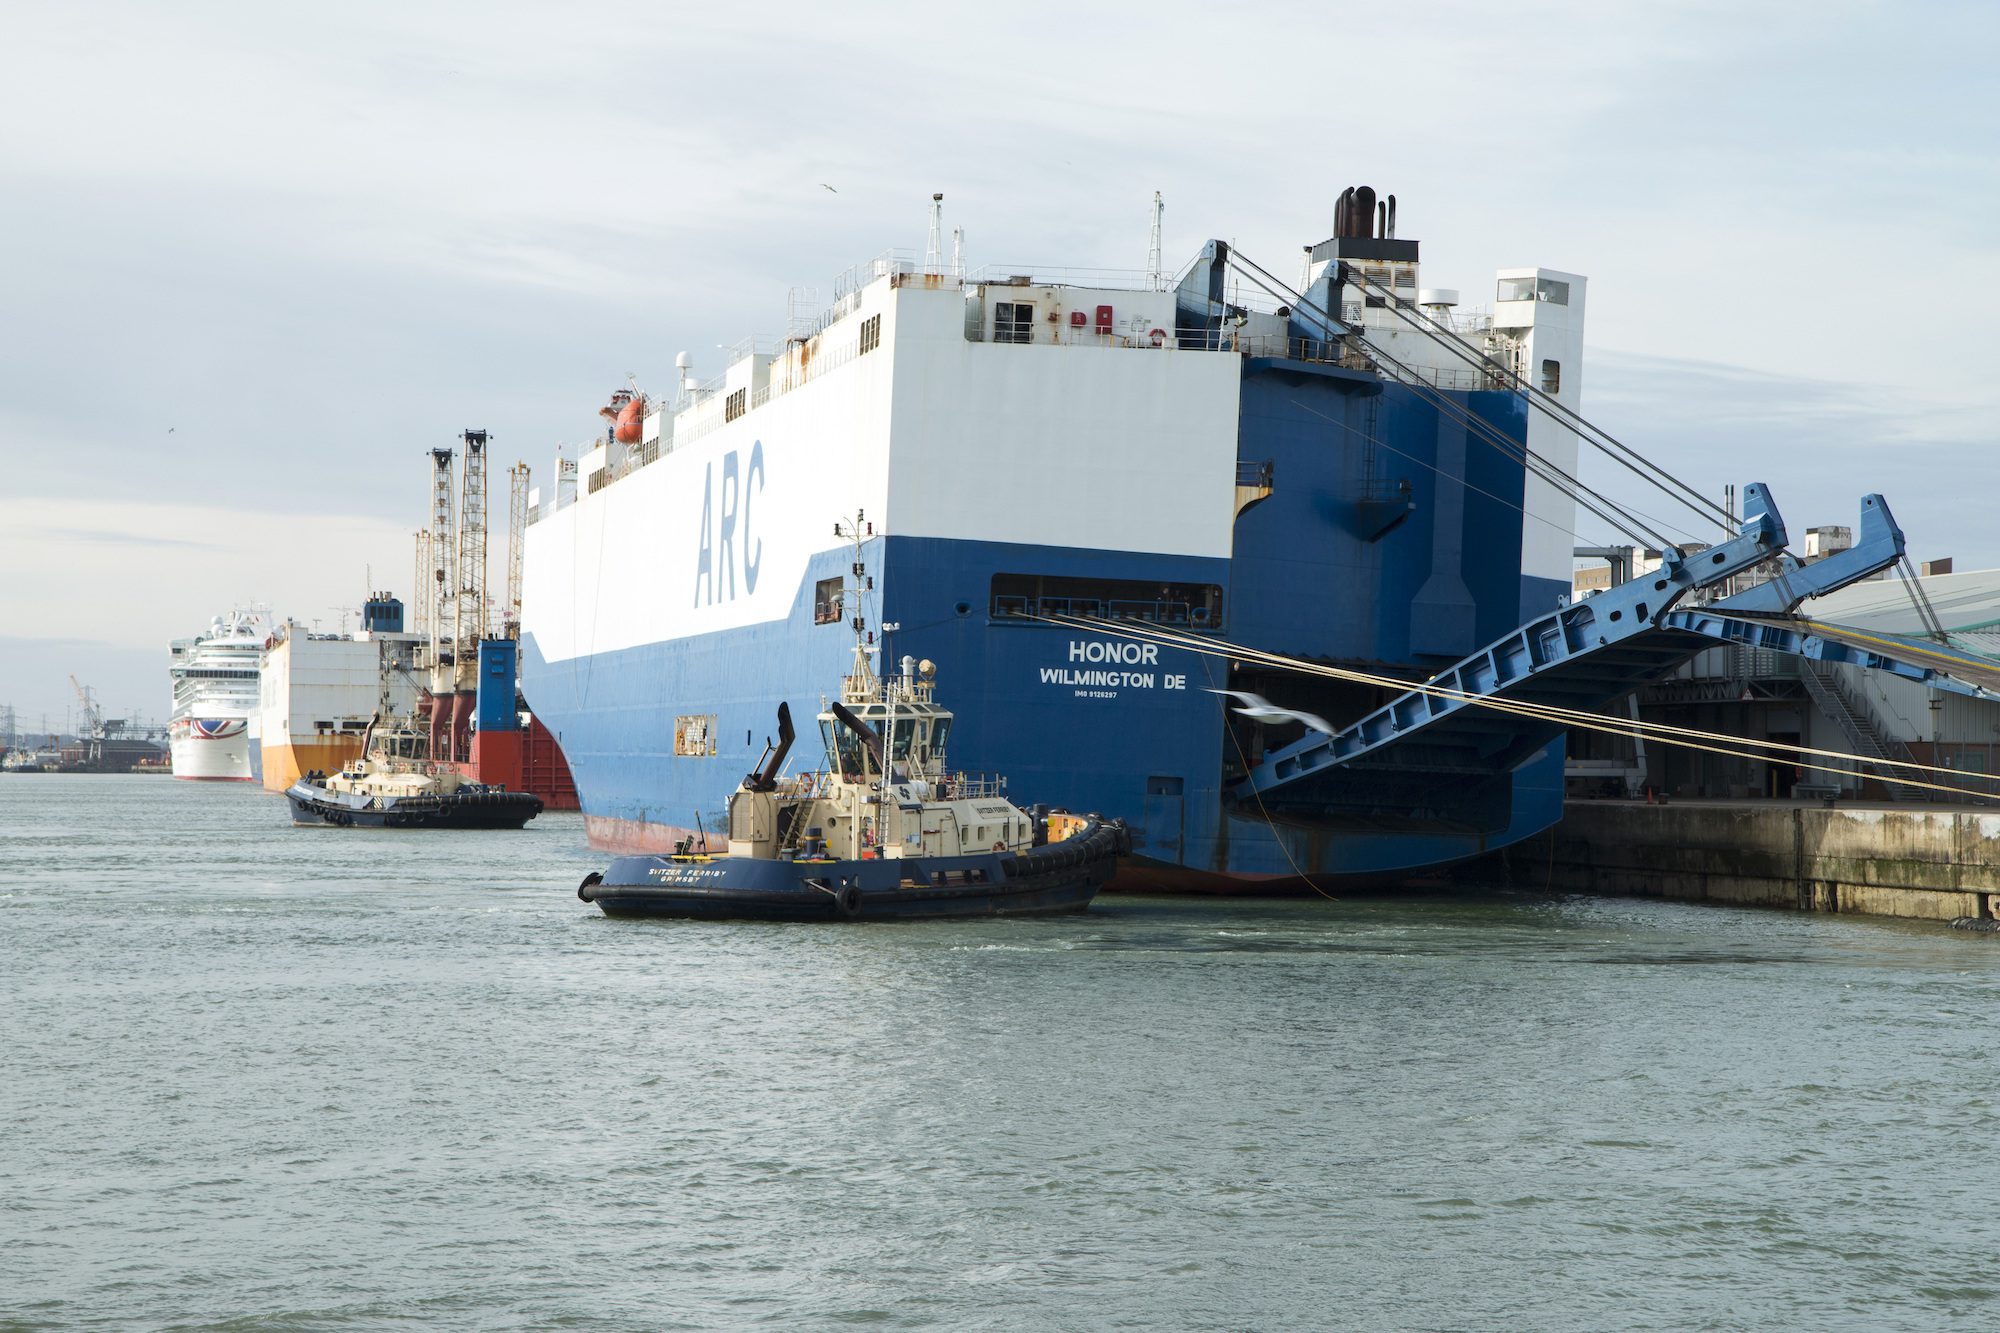 FILE PHOTO: An ARC ship at the Port of Baltimore. Credit: Gail Heaton / Shutterstock.com